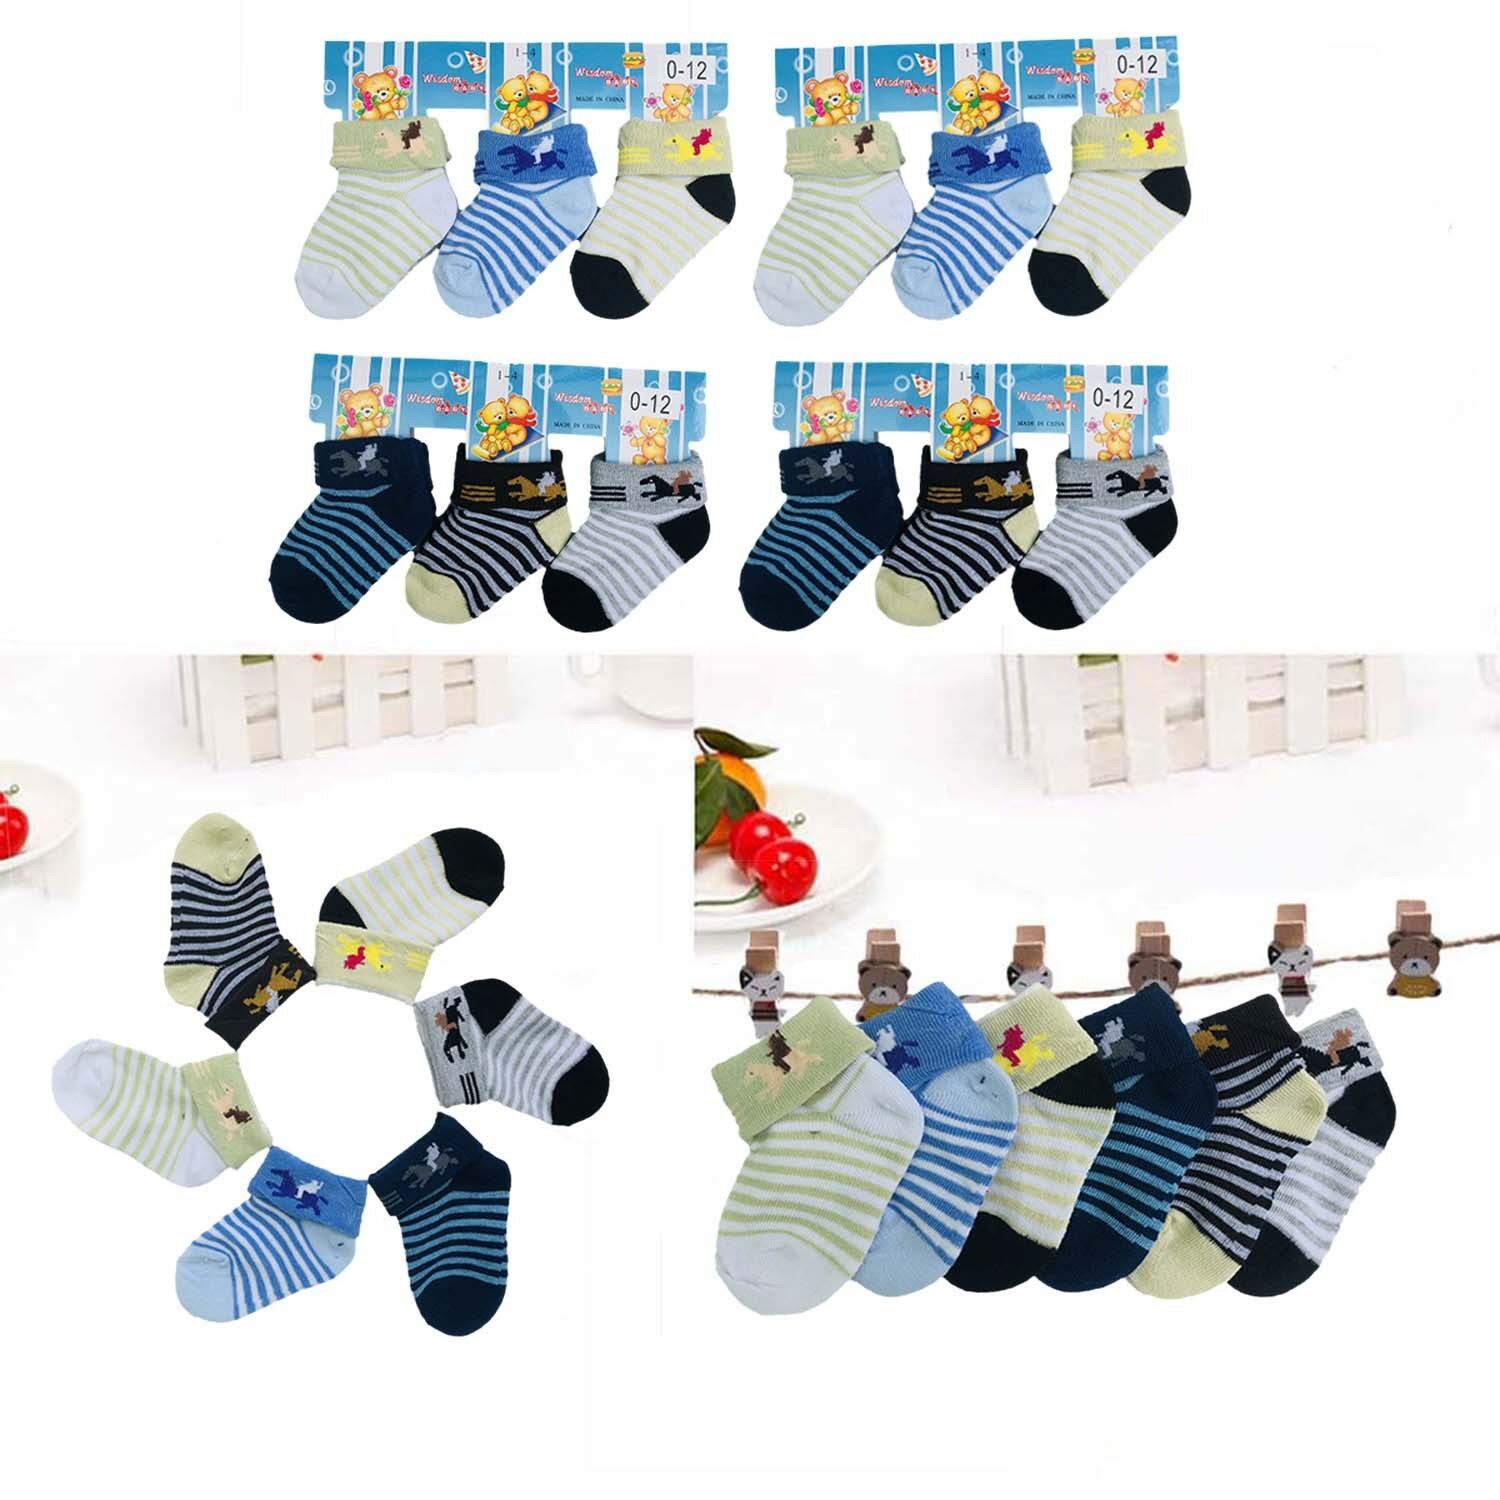 Lot 6 12 Pairs Multi Color Striped Baby Boy Newborn Baby Soft Socks 0-12 Month